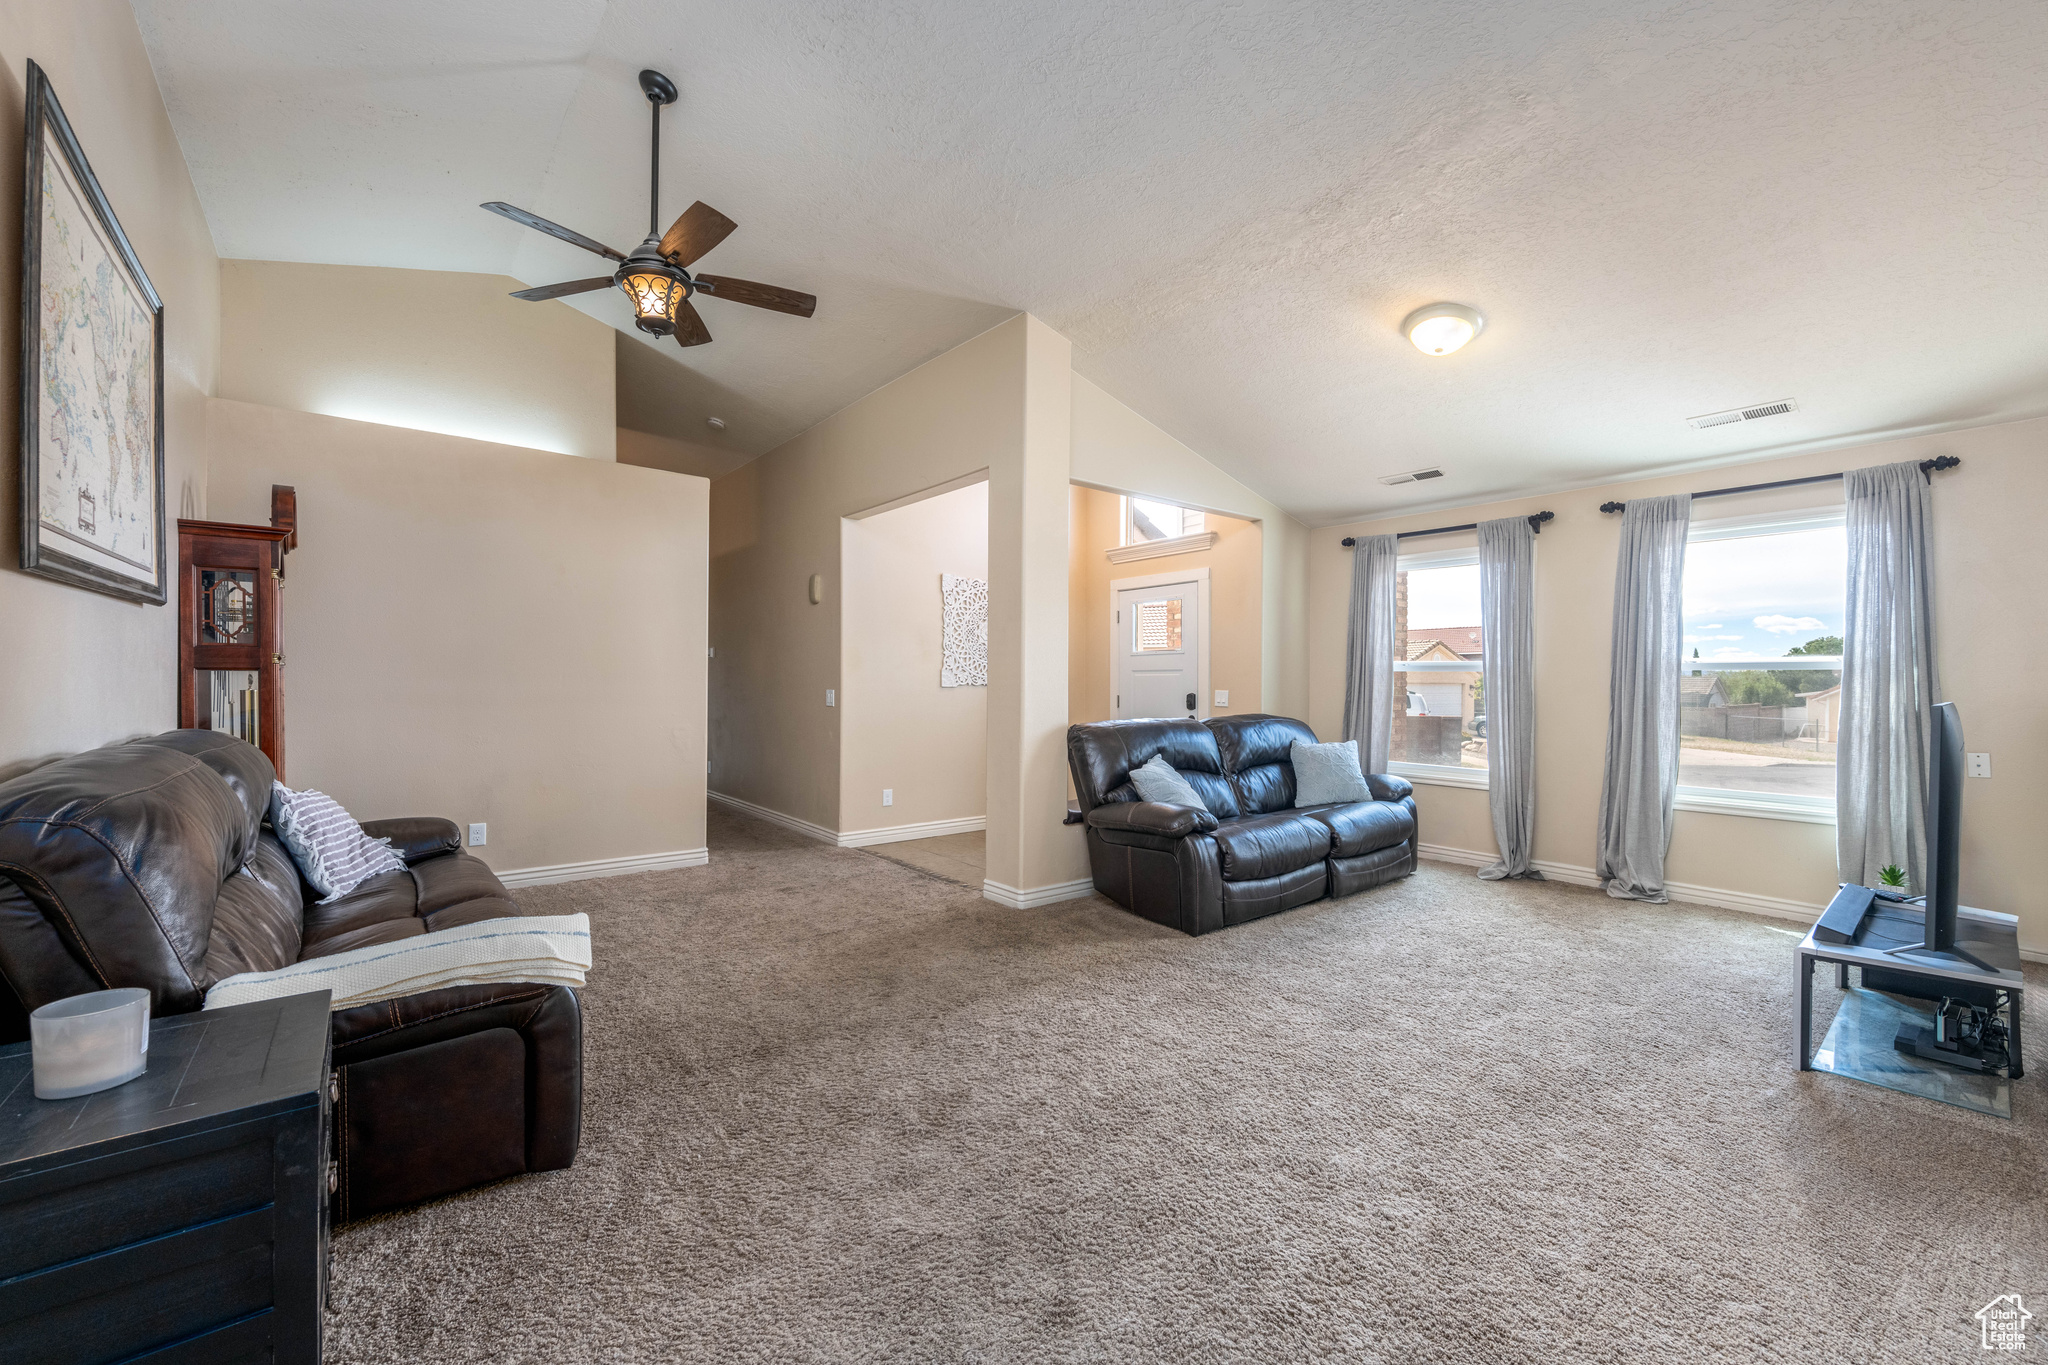 Living room with light carpet, ceiling fan, and vaulted ceiling